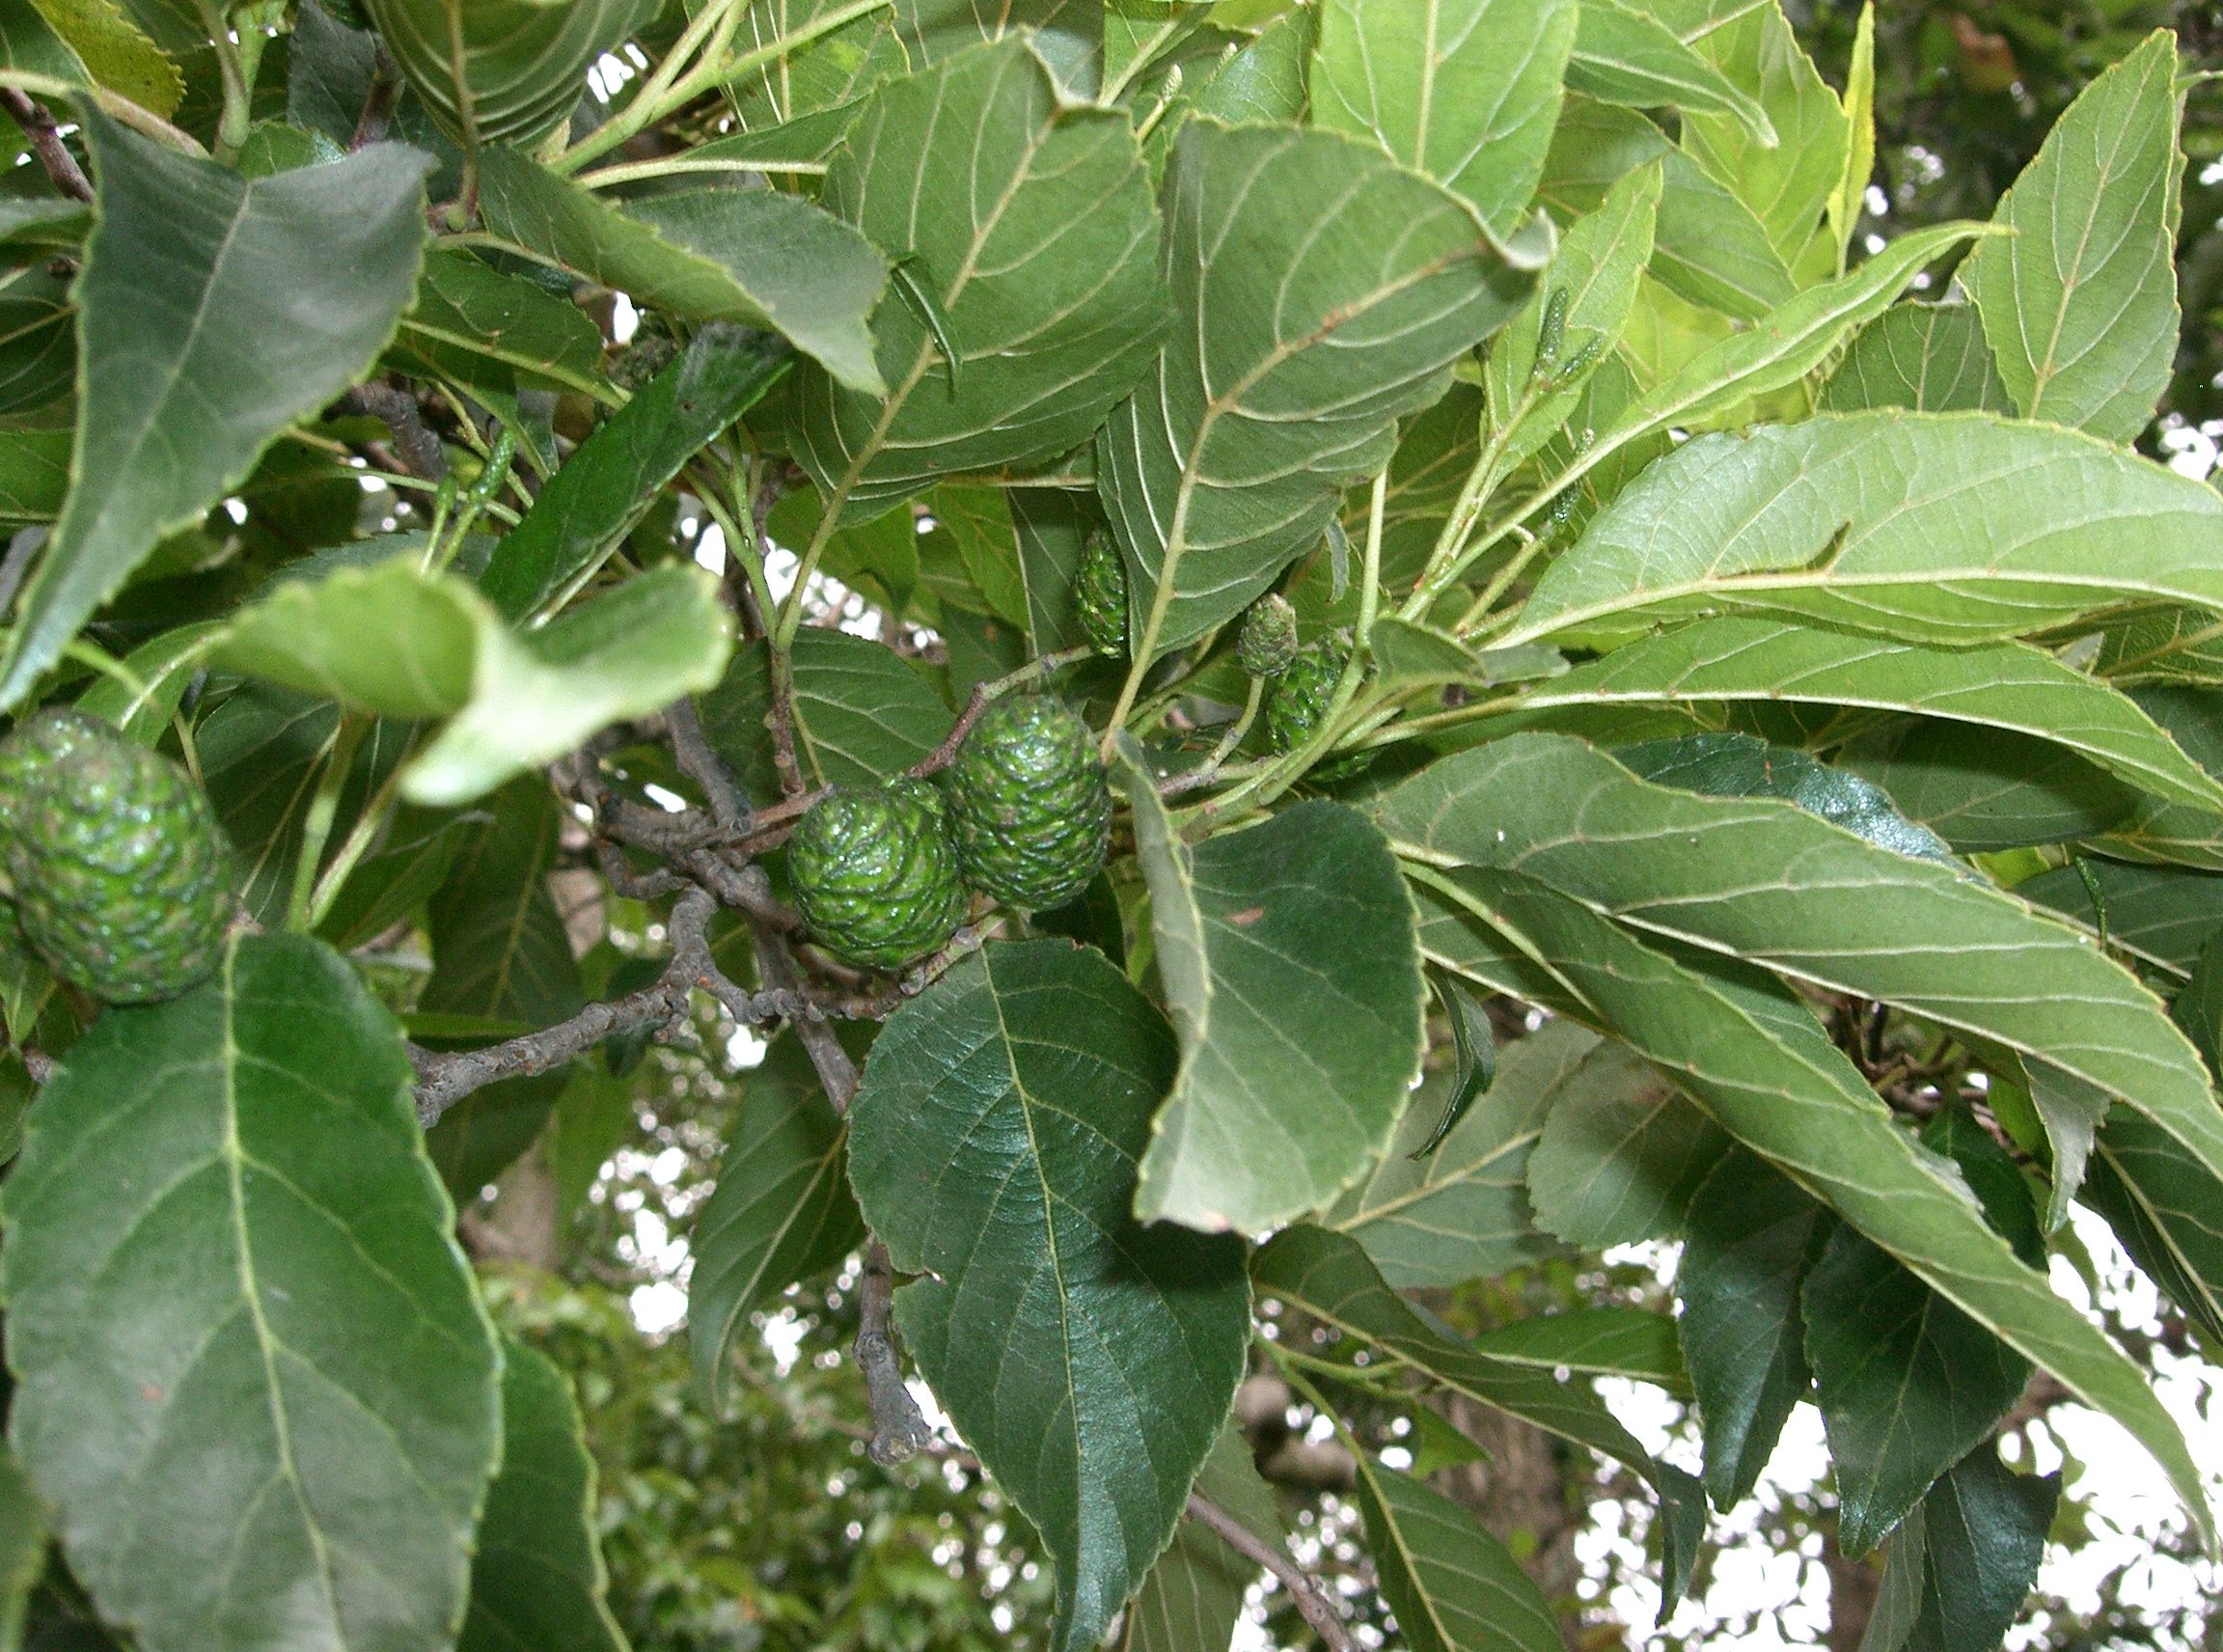 green fruits with green leaves on light-green stems and brown branches